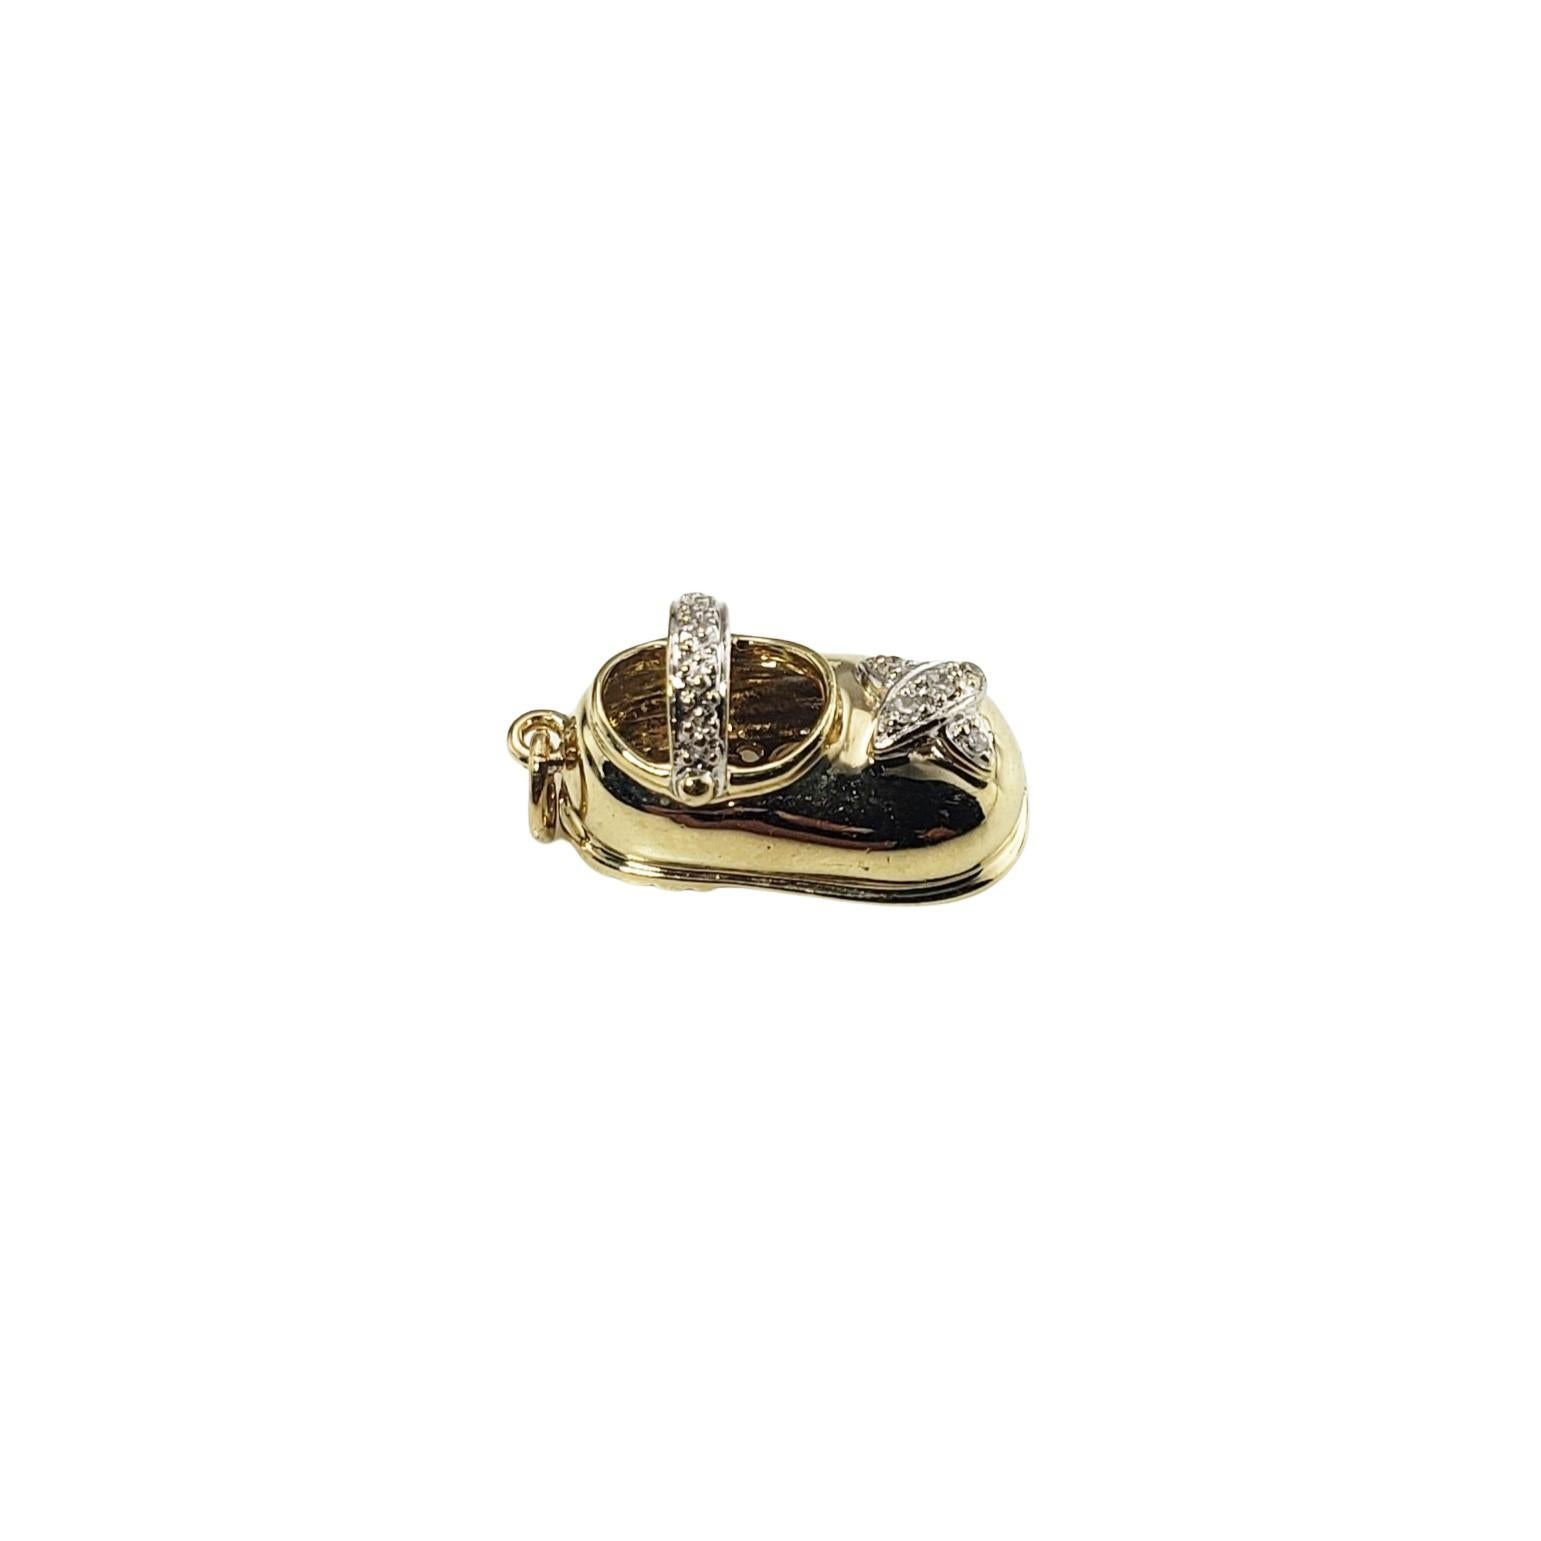 Celebrate baby’s first steps! This lovely 3D charm features five round brilliant cut diamonds set in beautifully detailed 14K yellow gold.

Approximate total diamond weight: .03 ct.

Diamond clarity: SI1

Diamond color: J-K

Size: 16 mm x 9